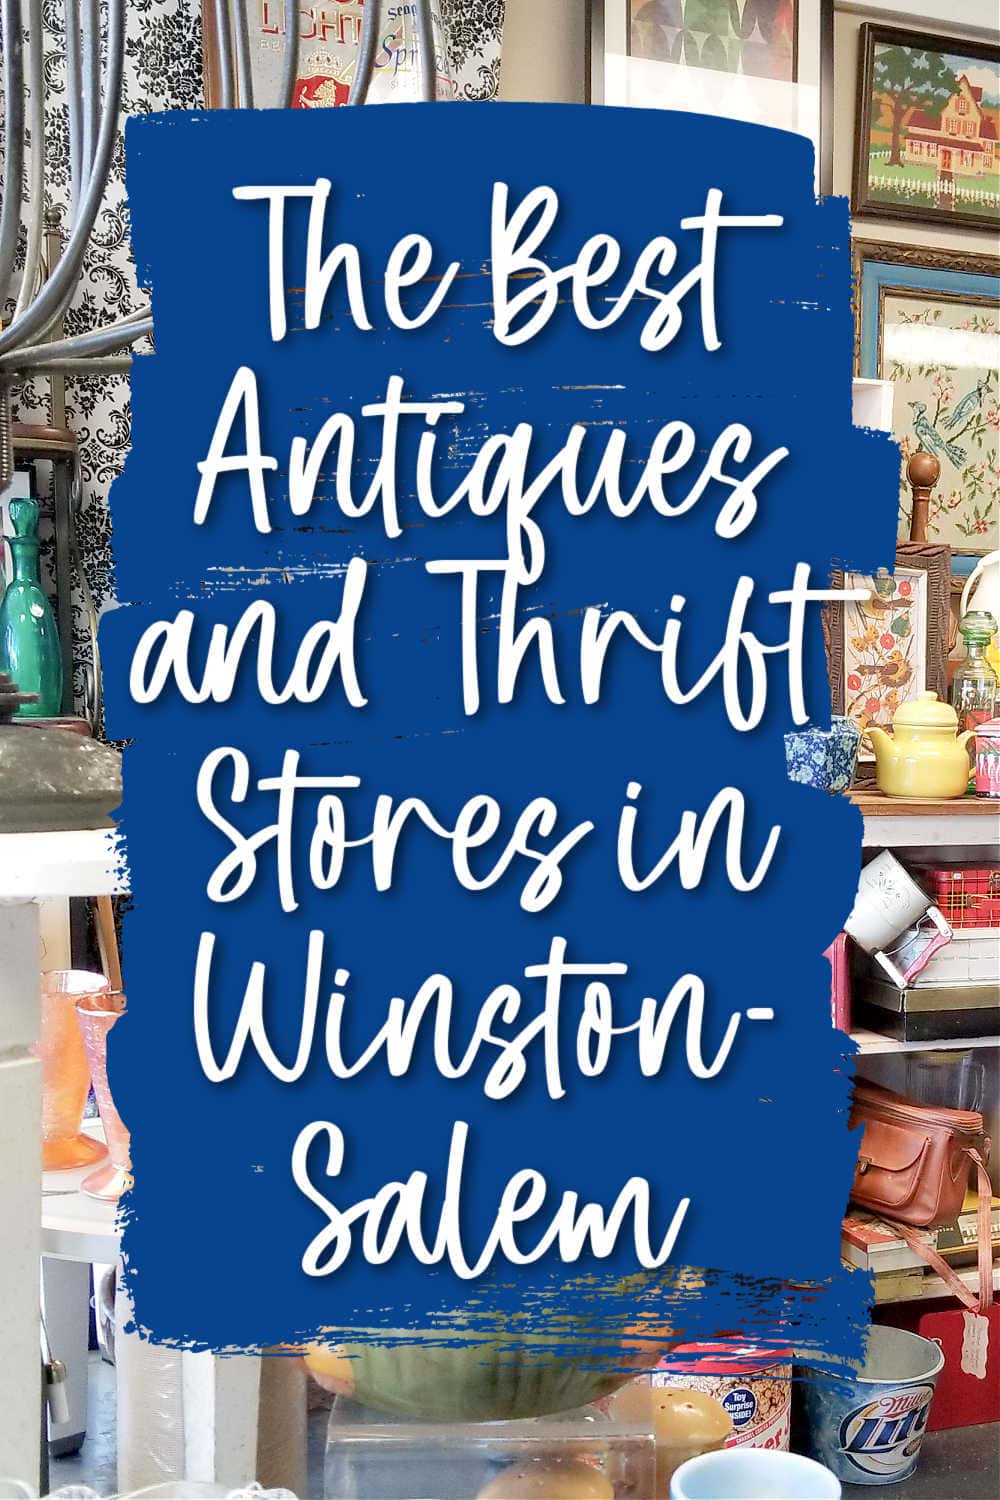 things to do in winston salem for thrift stores and antiques